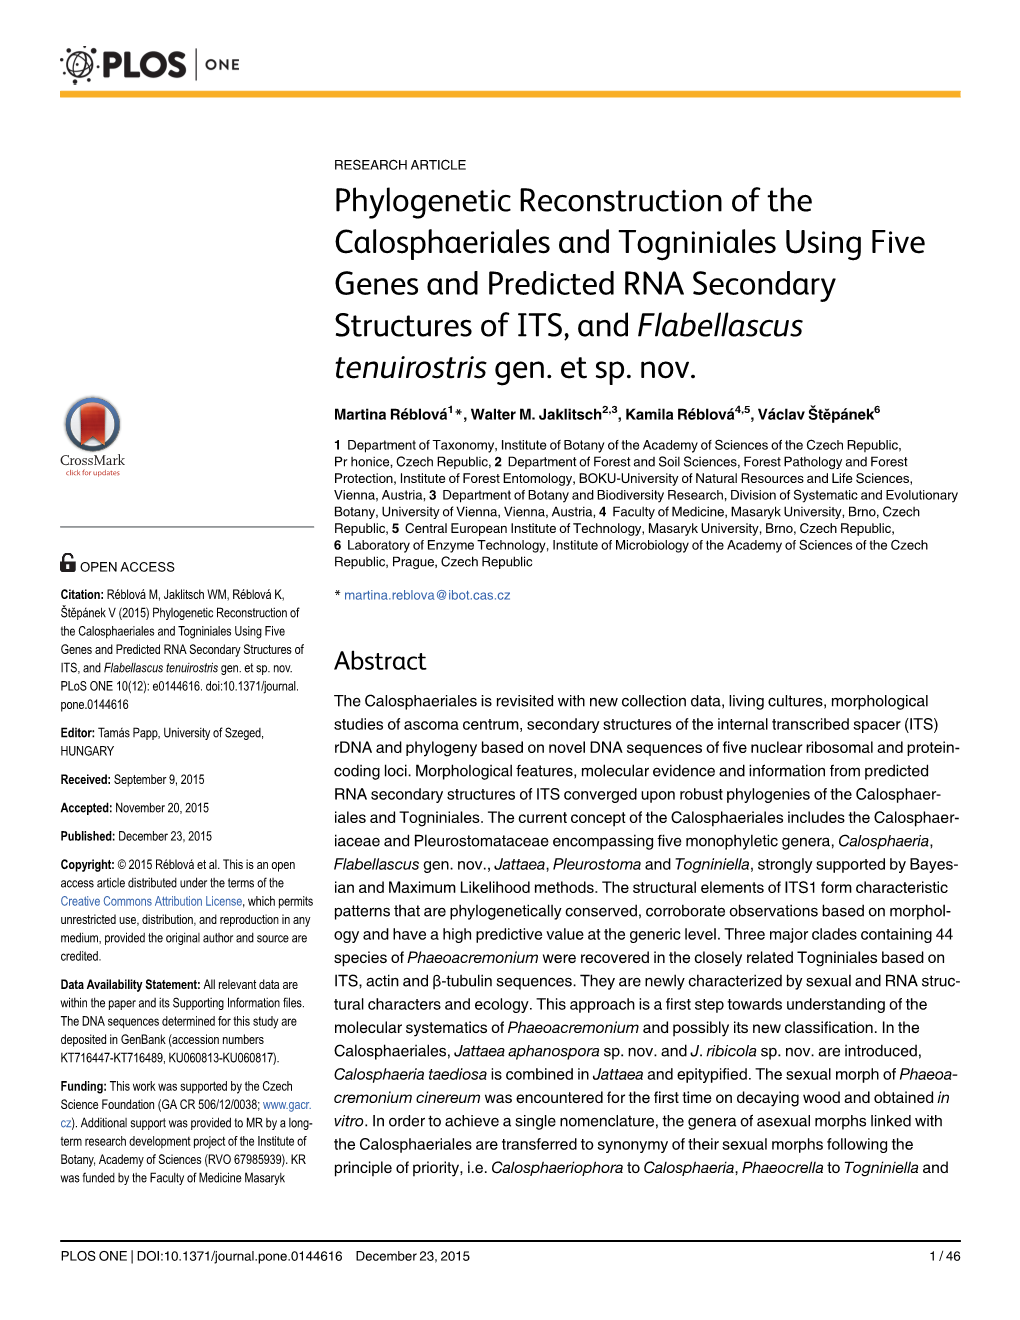 Phylogenetic Reconstruction of the Calosphaeriales and Togniniales Using Five Genes and Predicted RNA Secondary Structures of ITS, and Flabellascus Tenuirostris Gen